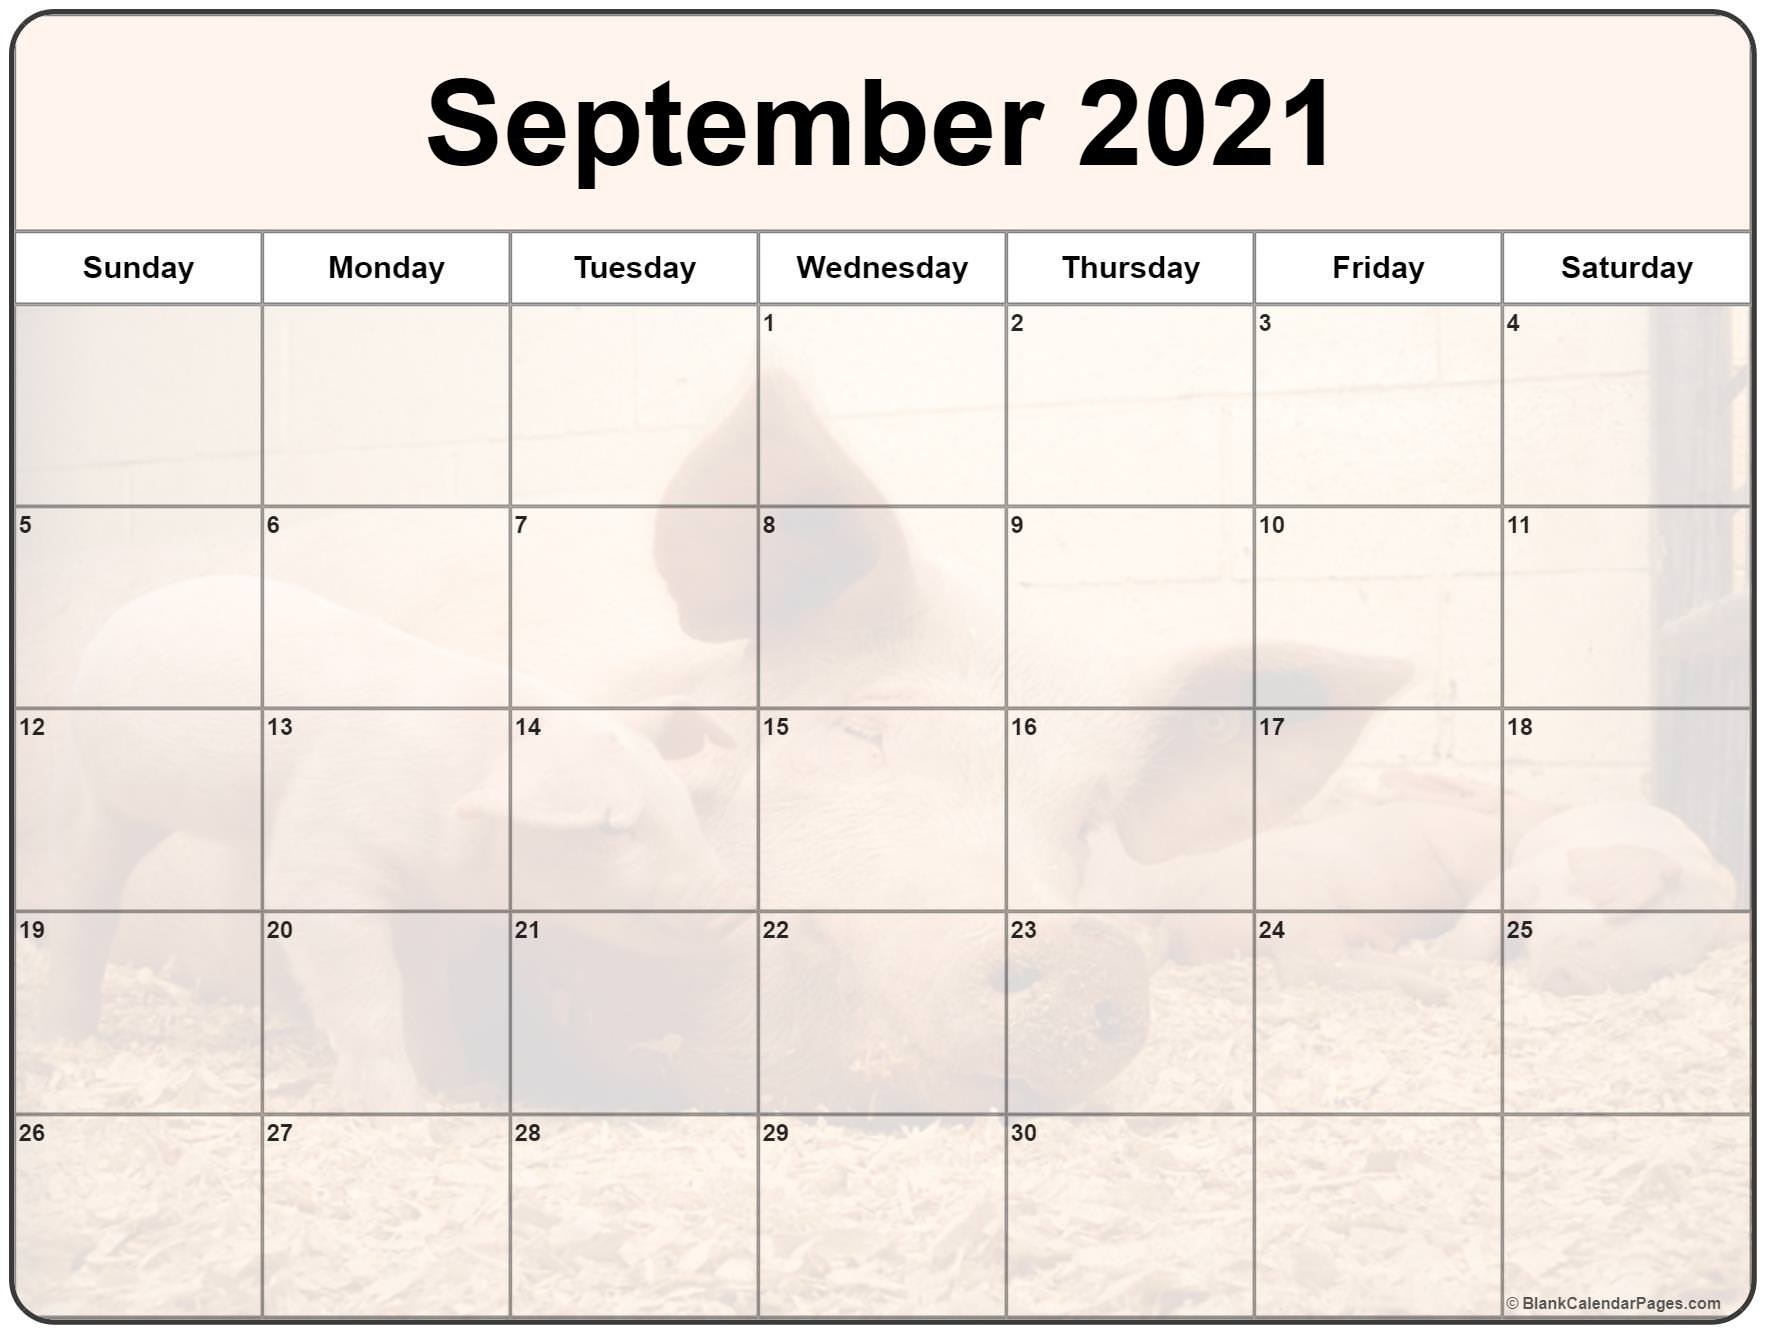 Collection Of September 2021 Photo Calendars With Image Filters. September 2021 Calendar Virgo